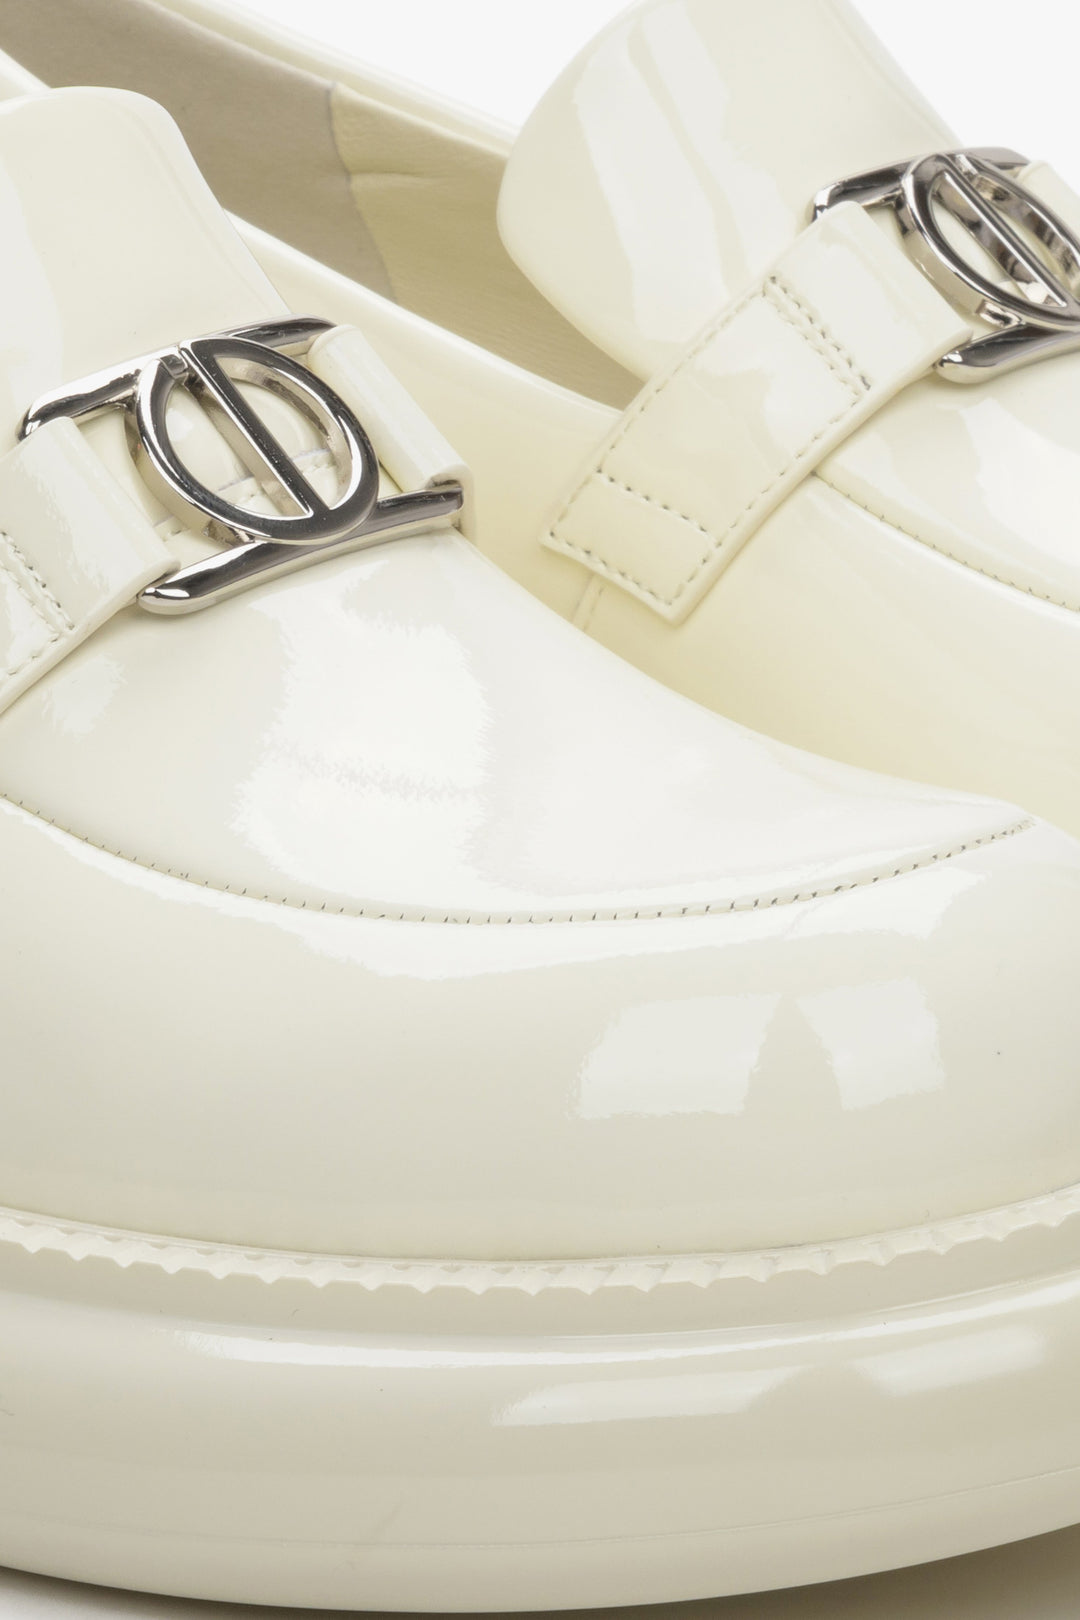 Patent leather light beige loafers - a close-up on details.